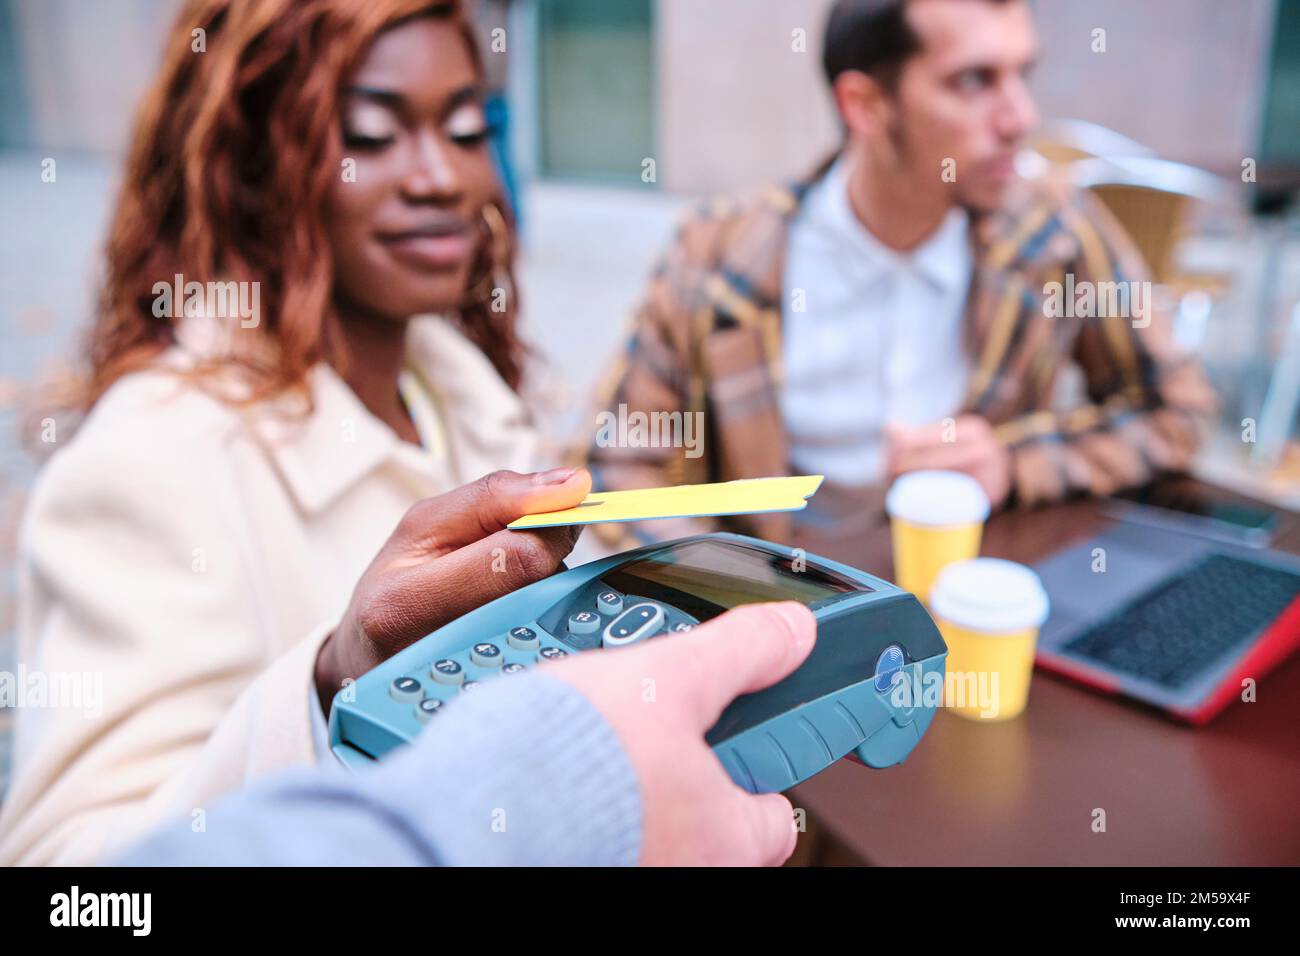 Close-up view of a woman making contactless payment with a credit card at a coffee shop. Stock Photo